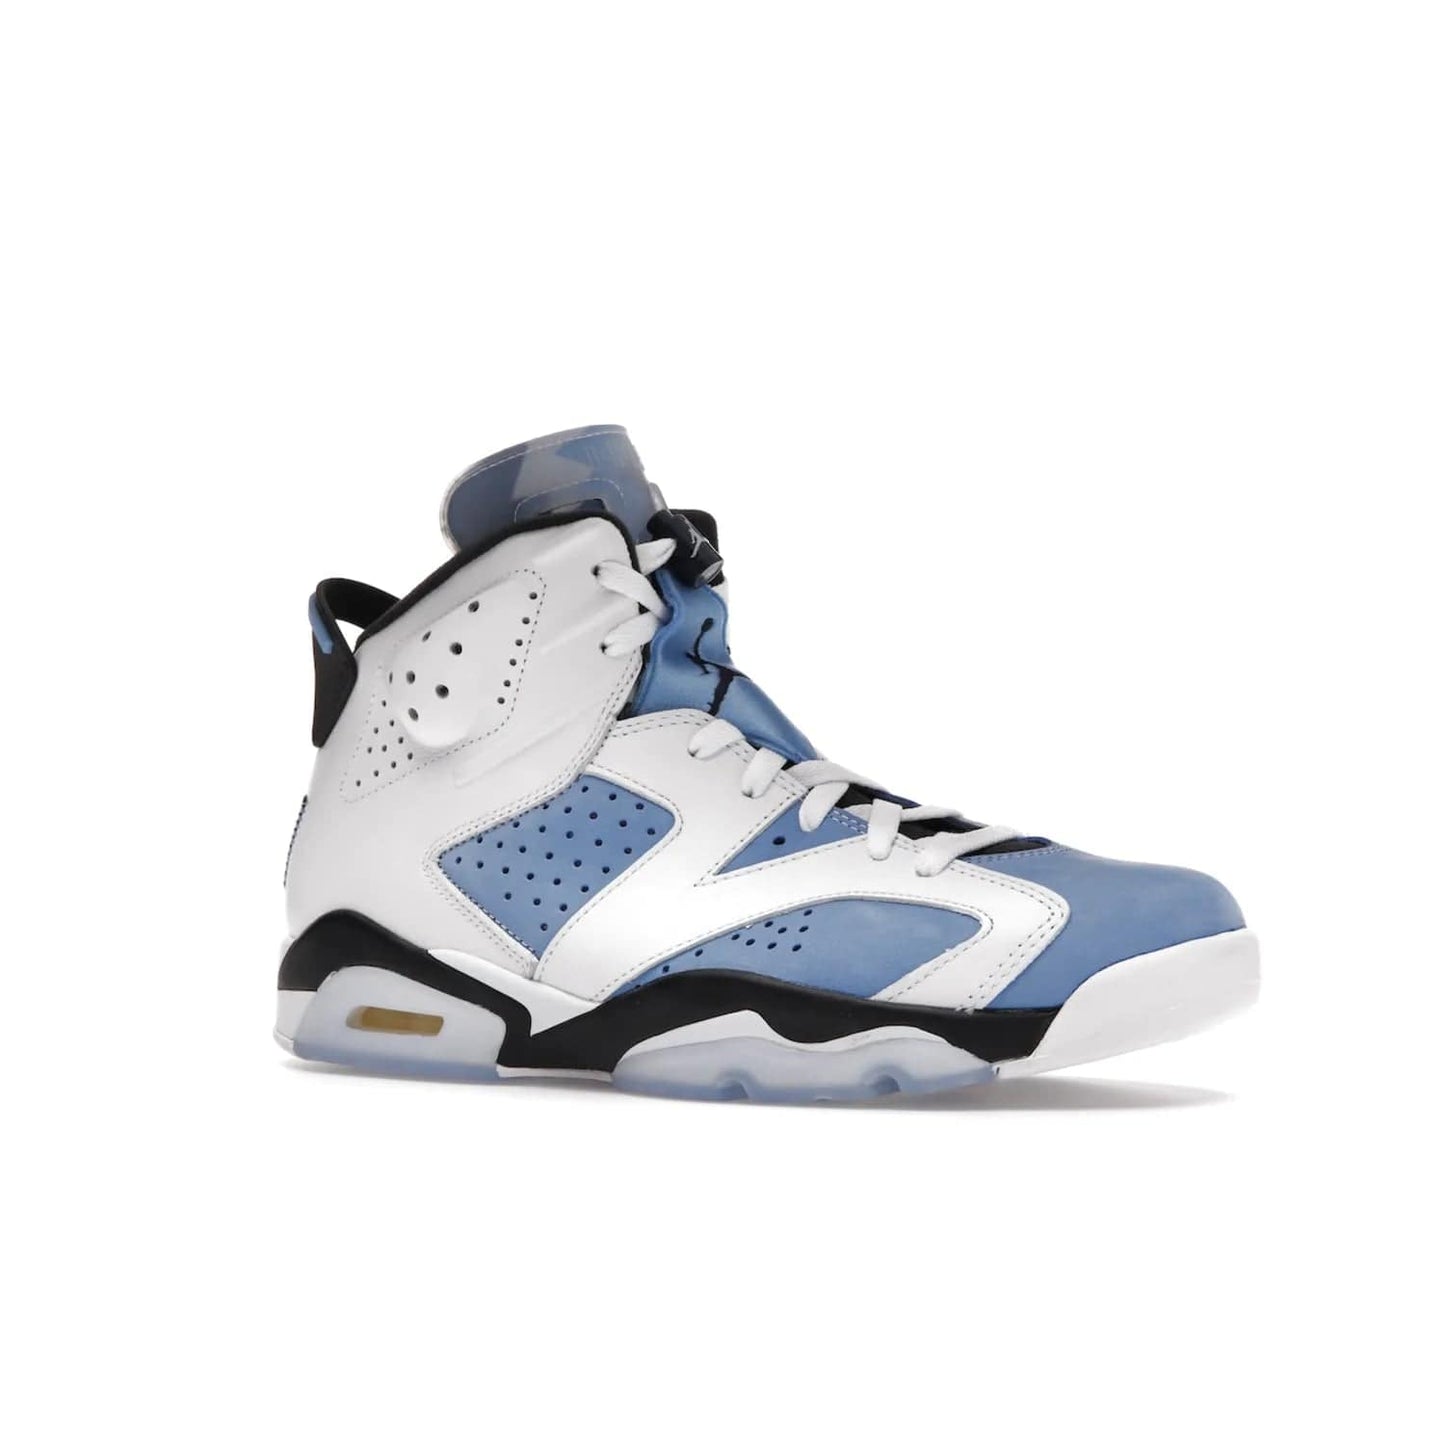 Jordan 6 Retro UNC White - Image 4 - Only at www.BallersClubKickz.com - Air Jordan 6 Retro UNC White with classic UNC colors brings nostalgia and style to a legendary silhouette. Celebrate MJ's alma mater with navy blue accents, icy semi-translucent sole and Jordan Team patch. Out March 2022 for the Sneaker Enthusiast.